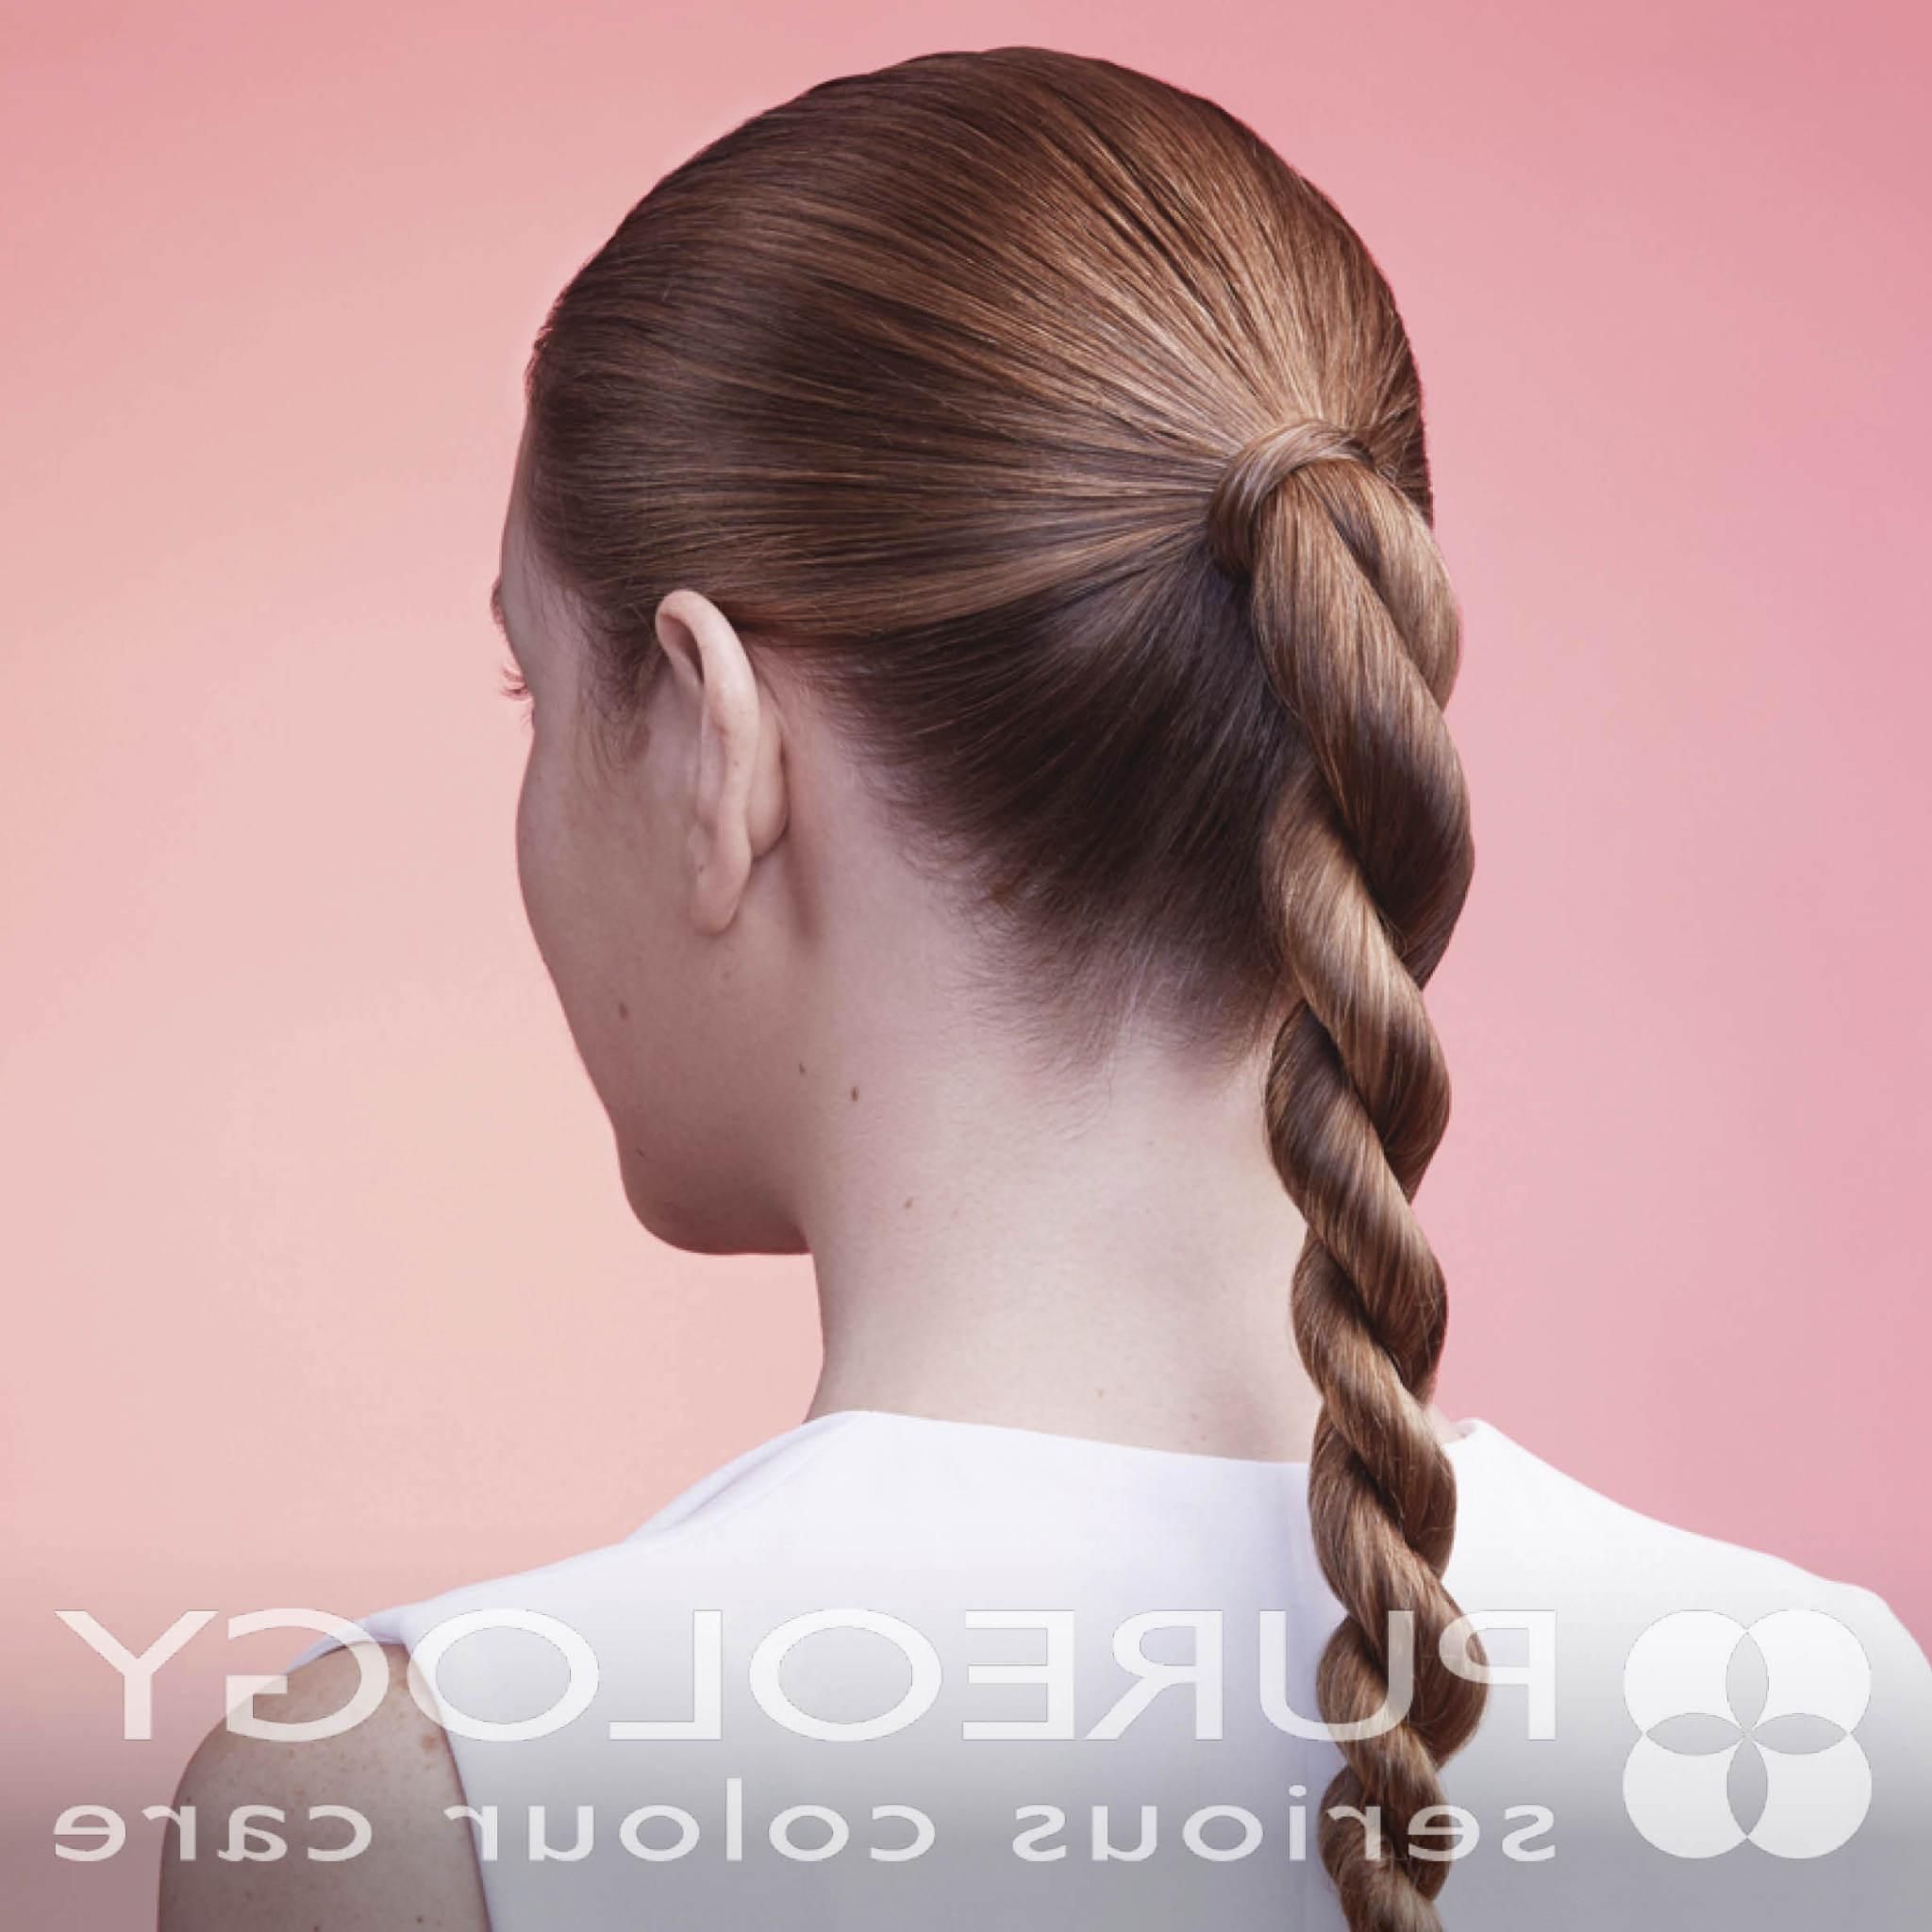 Widely Used Pink Rope Braided Hairstyles Pertaining To 7 Gym Hairstyles That Are Actually Cute & Easy To Do – Pureology (View 11 of 20)